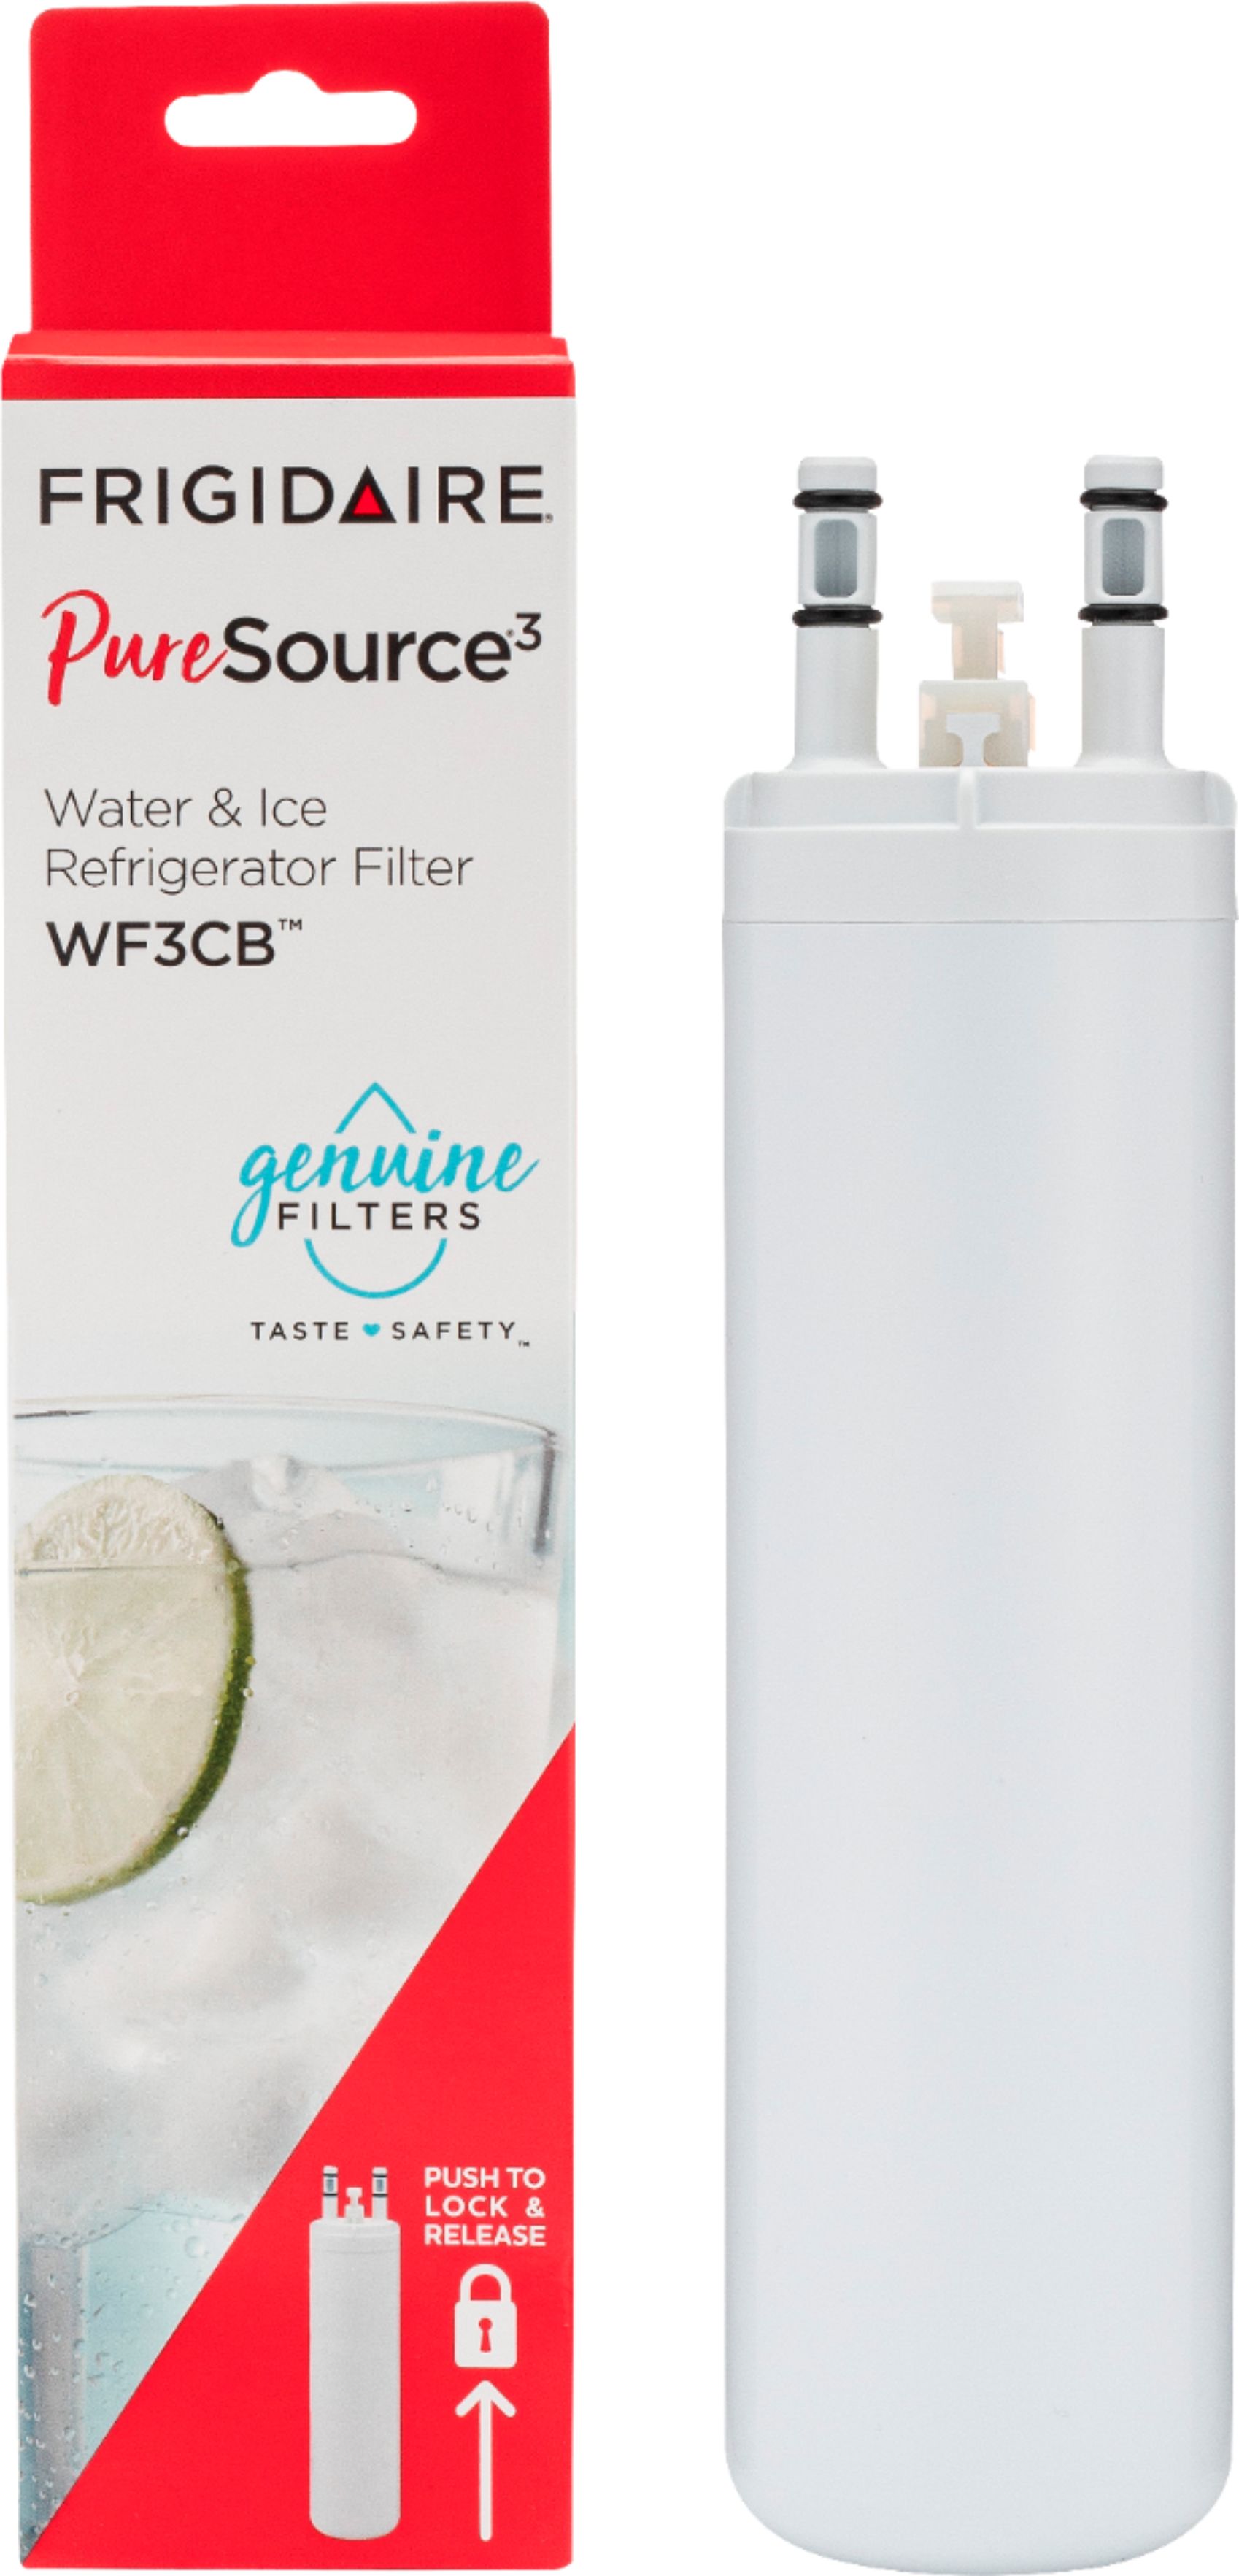 Frigidaire Pure Source3 WF3CB Refrigerator Replacement Filter Water Ice Set of 2 